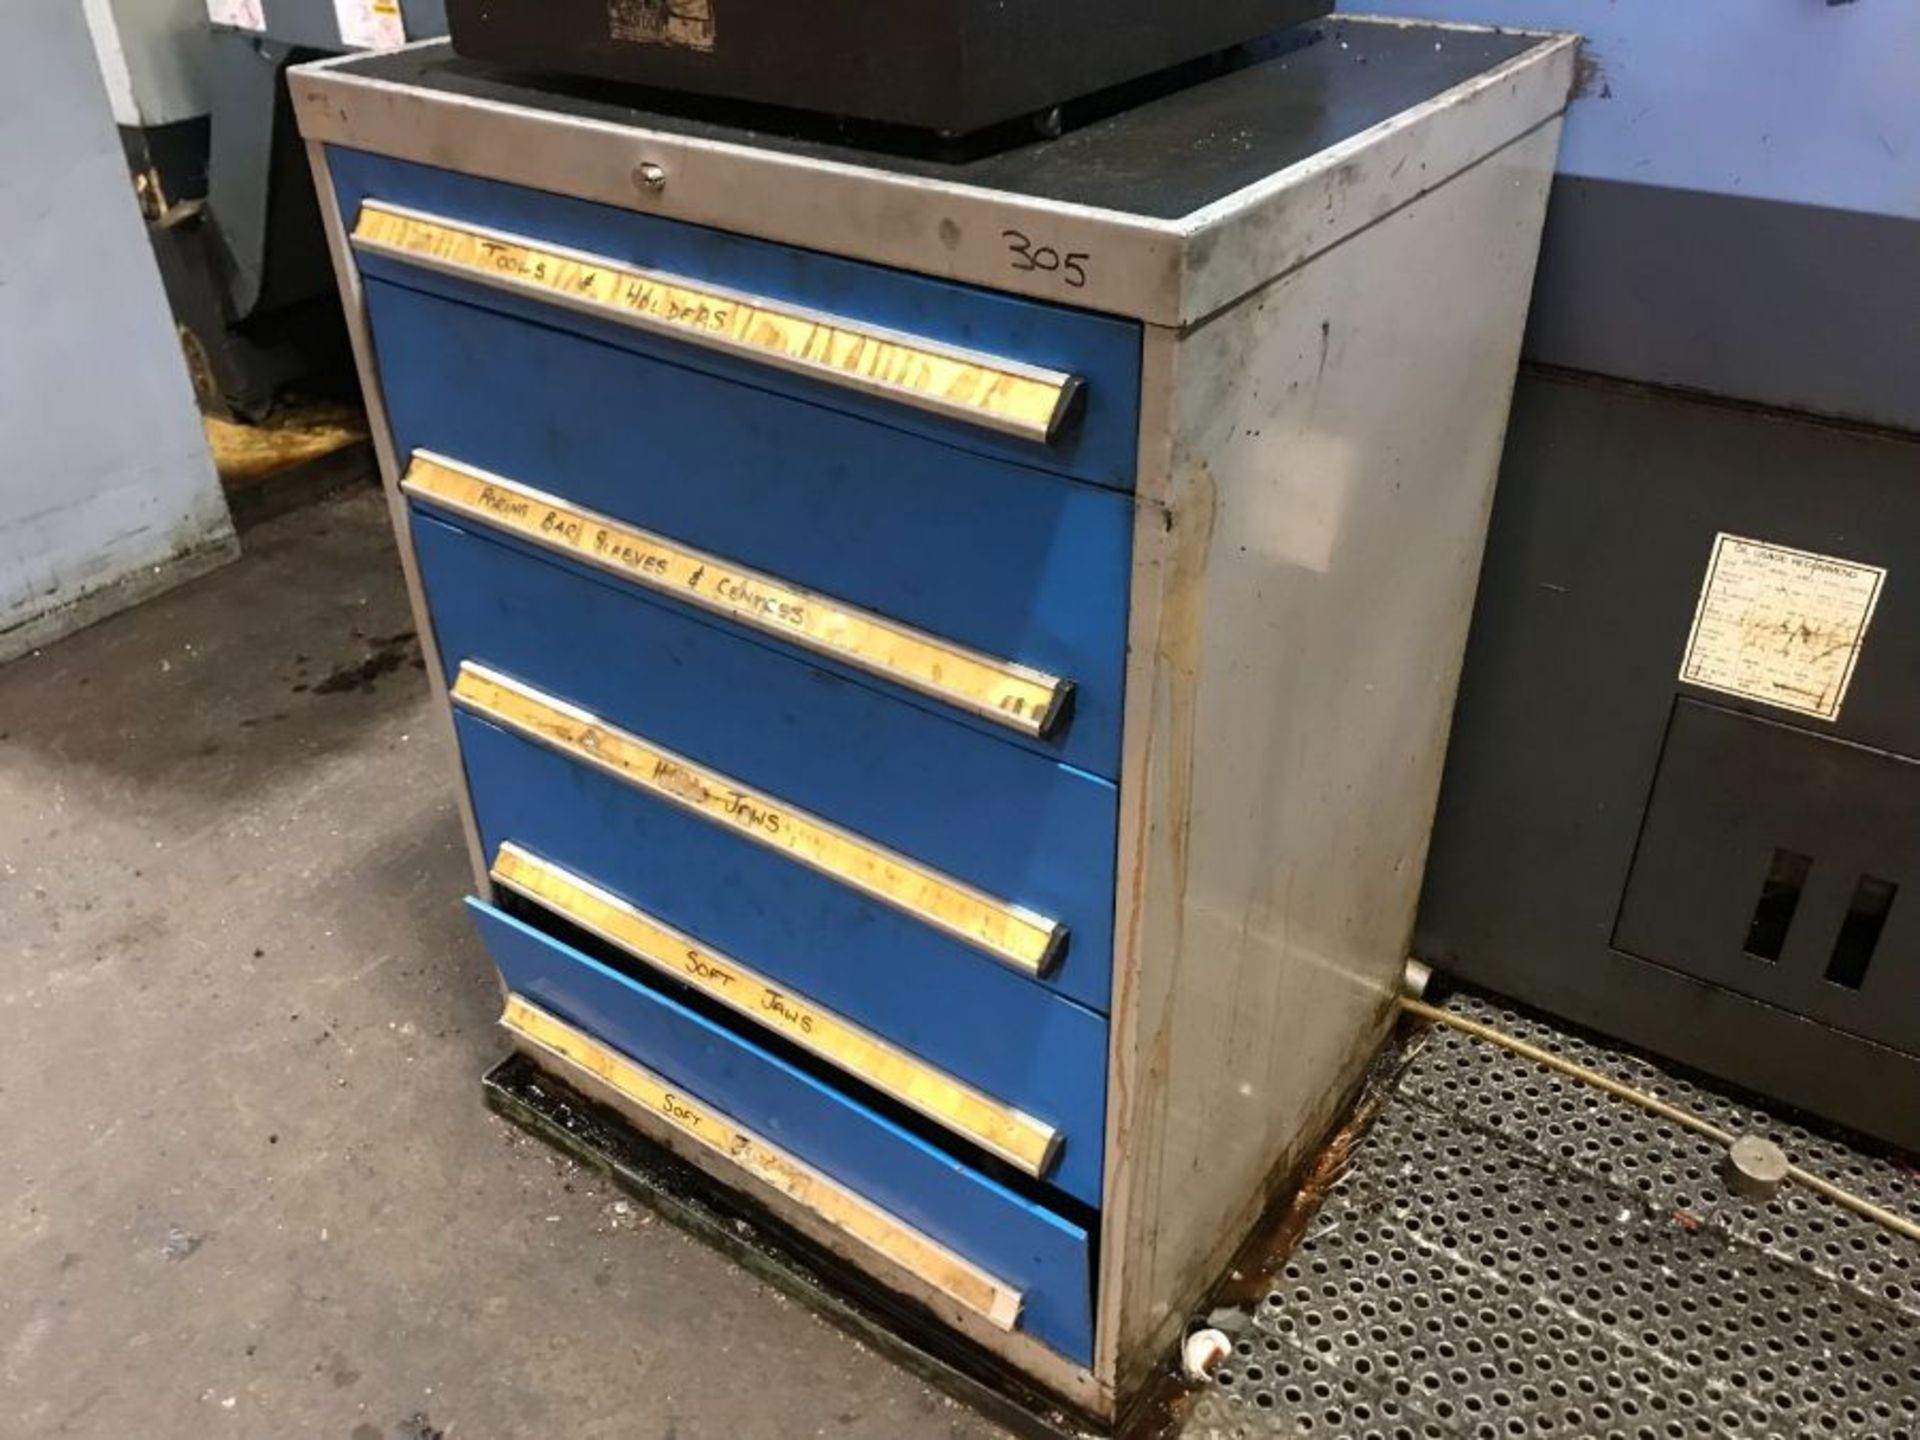 Tool cabinet and turning contents